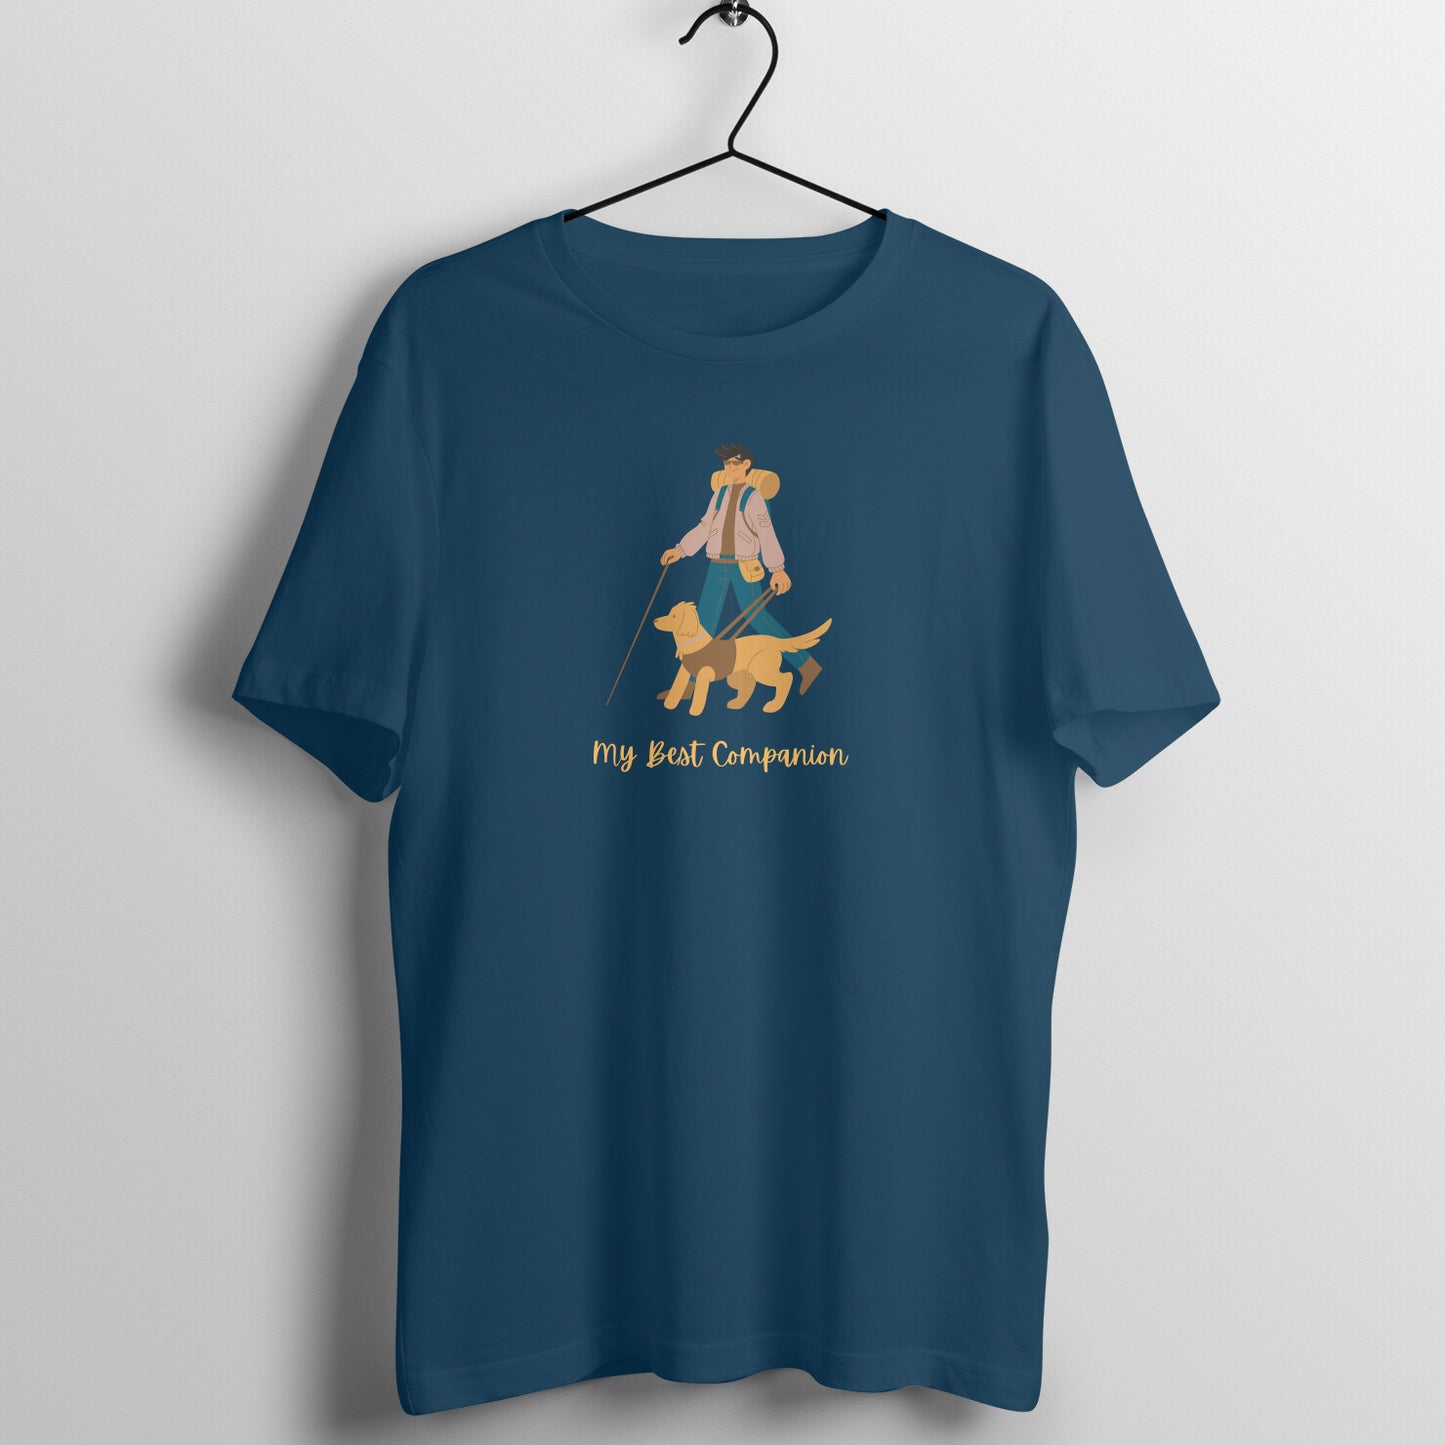 MY BEST COMPANION - UNISEX T SHIRT FOR DOG LOVERS - Travel with your soulmate